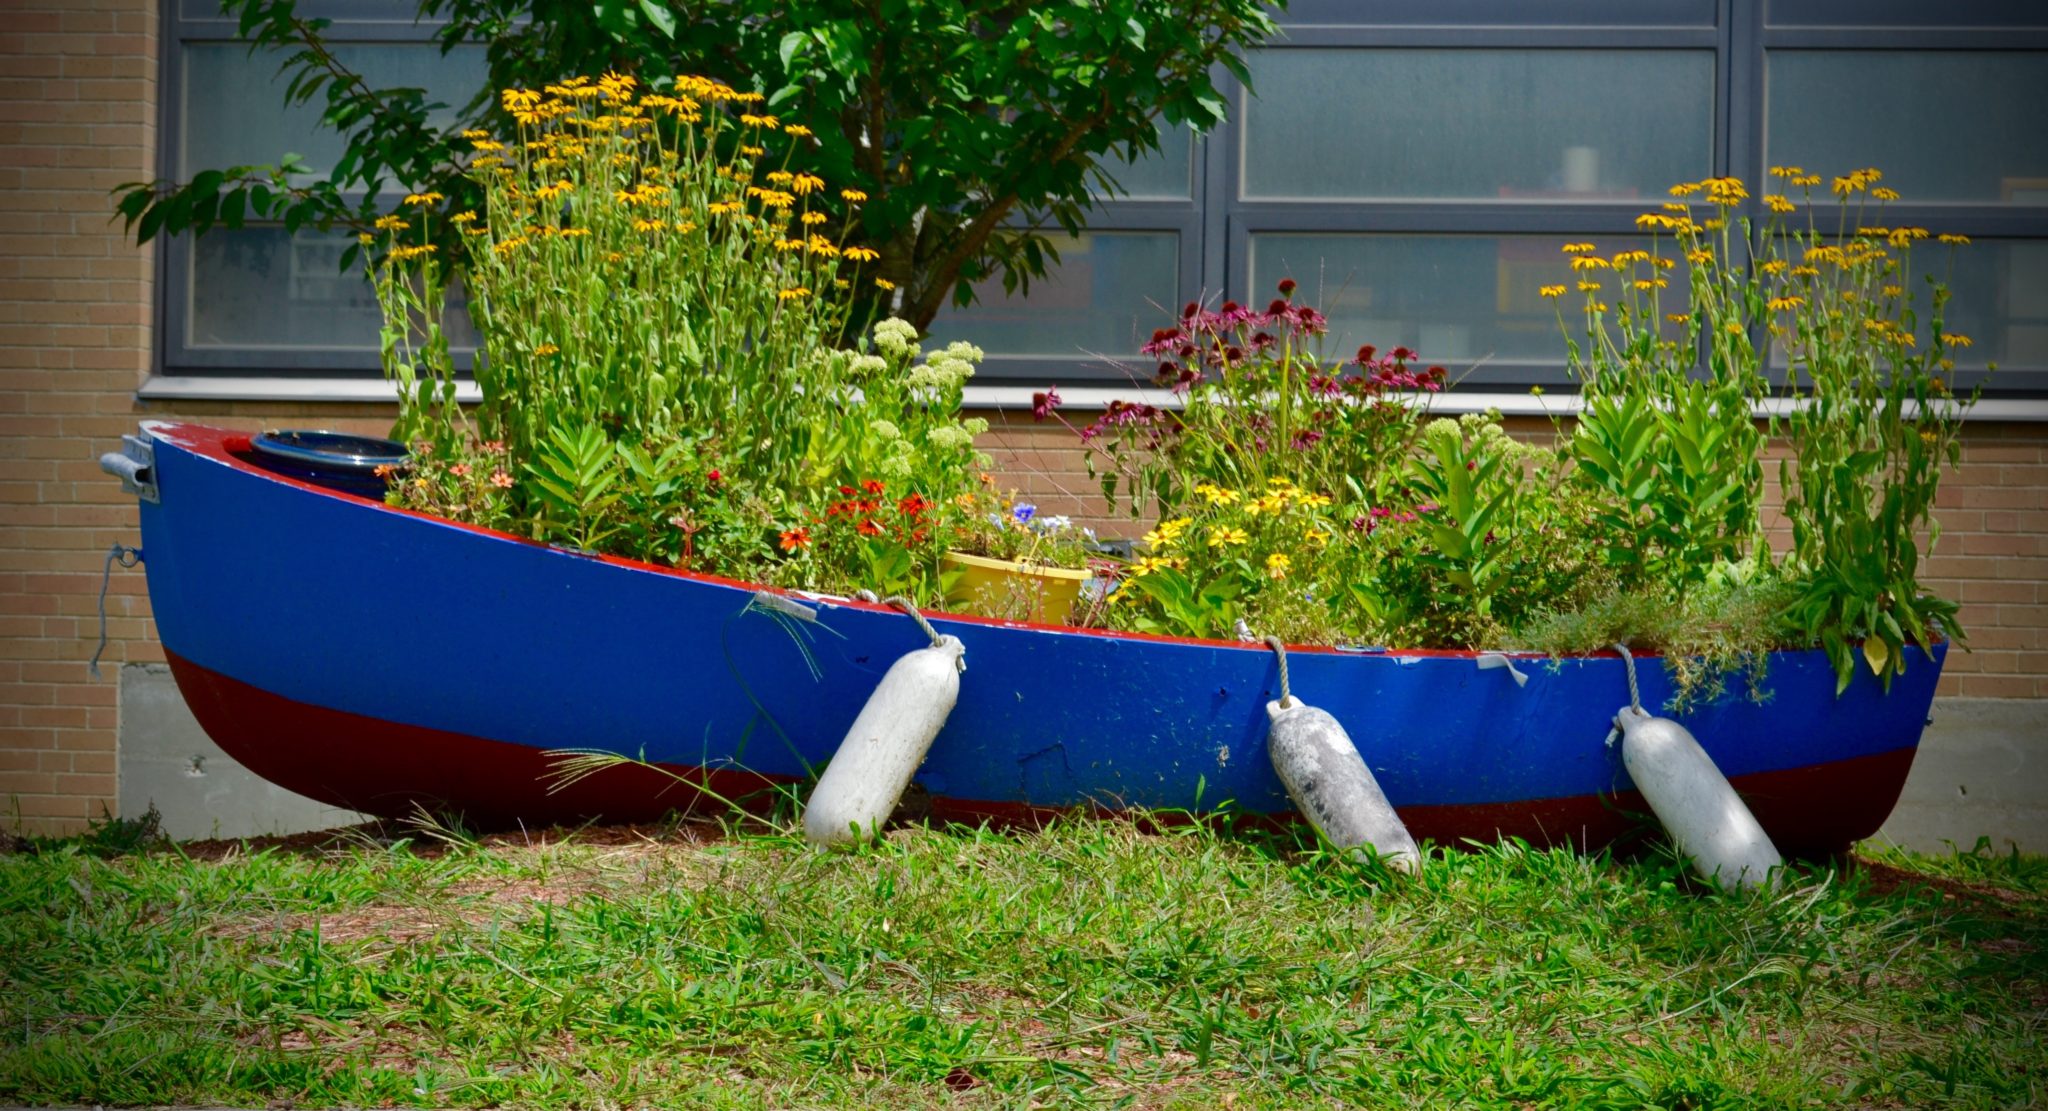 SMS boat out front of school with plants inside